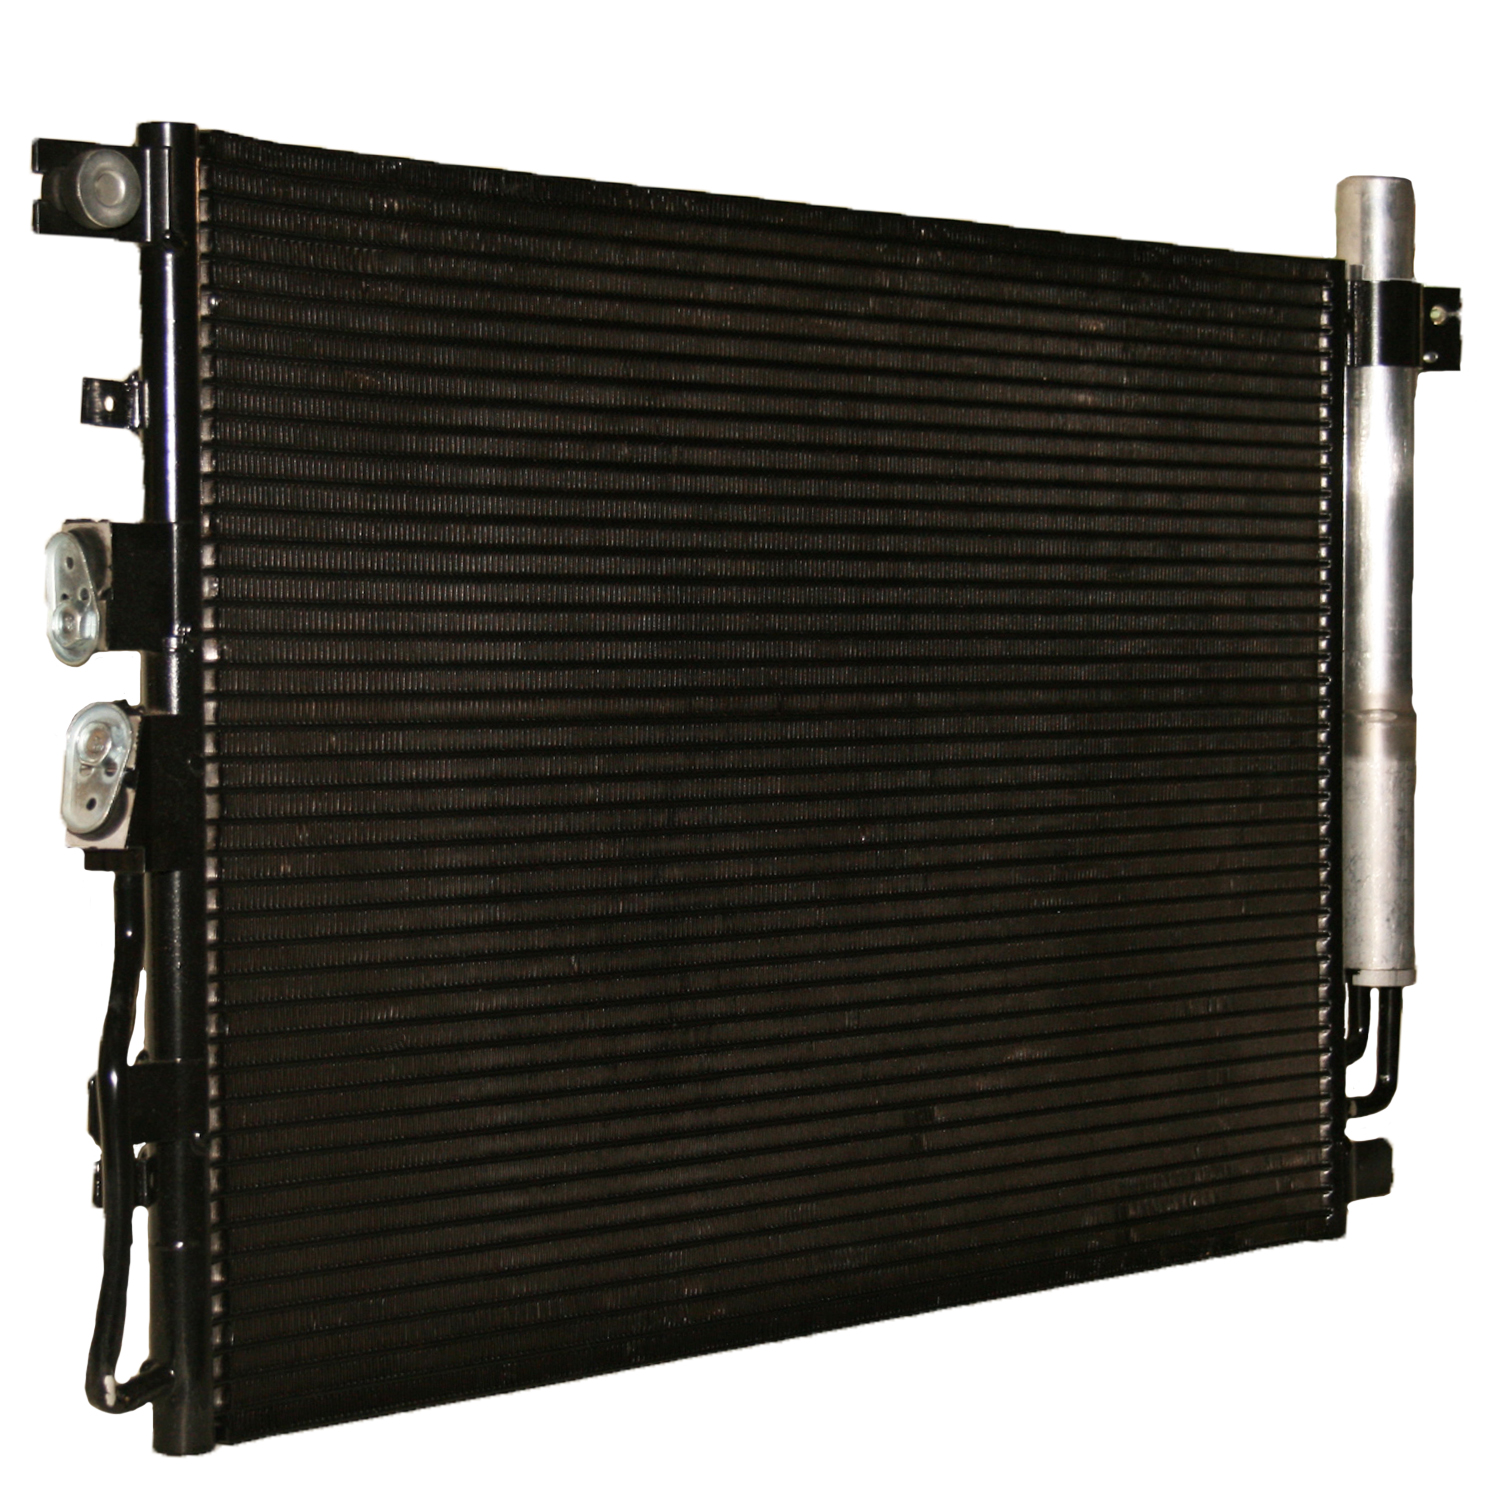 TCW Condenser 44-5040 New Product Image field_60b6a13a6e67c